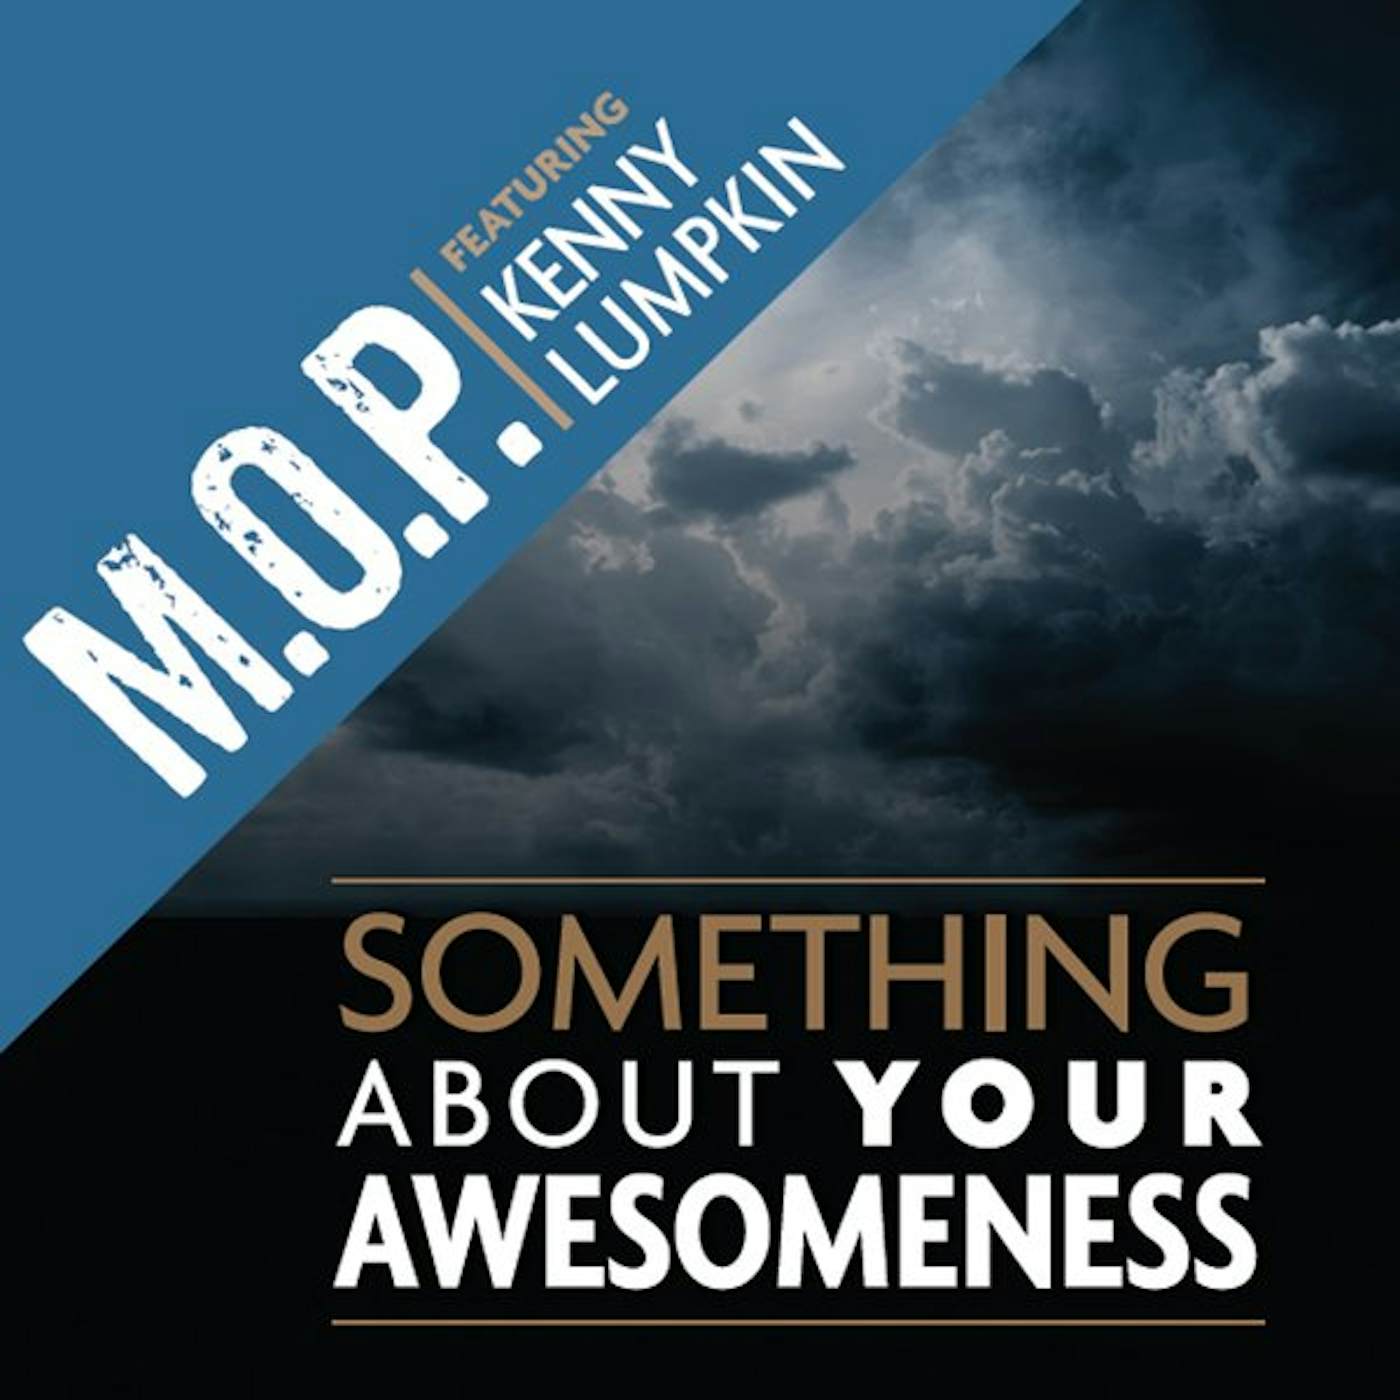 M.O.P. SOMETHING ABOUT YOUR AWESOMENESS CD